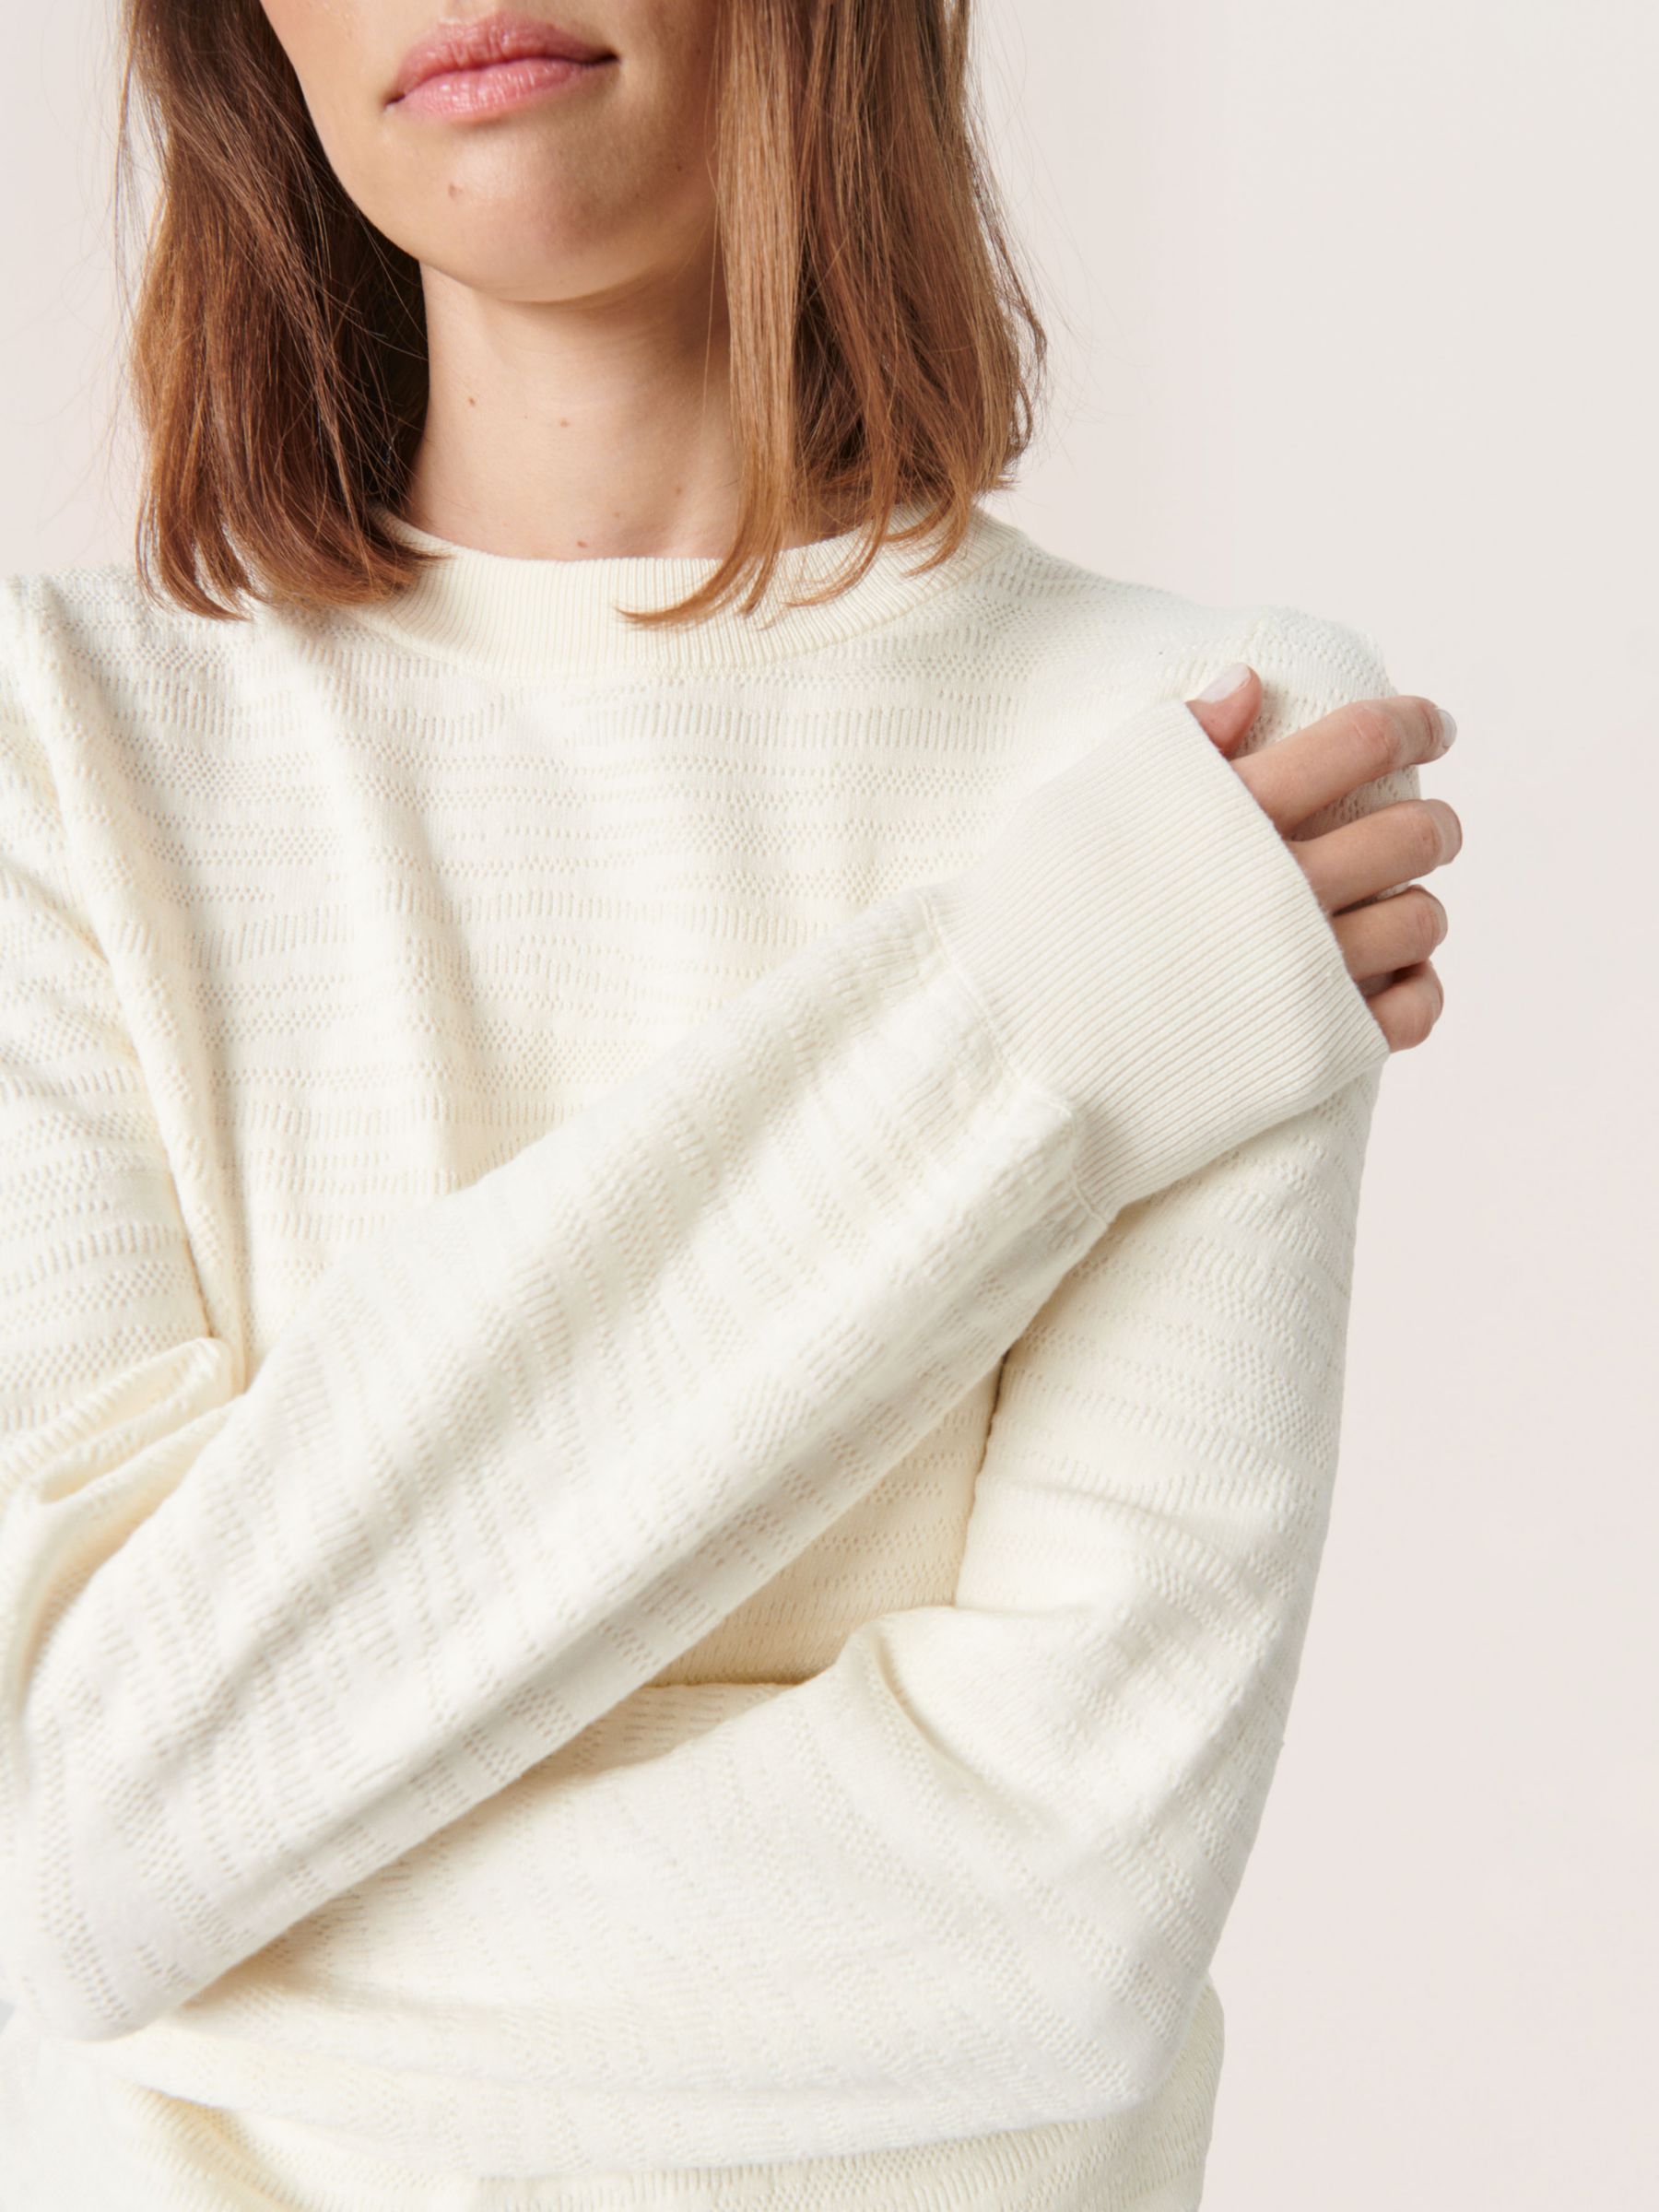 Soaked In Luxury Pipa Jumper, Whisper White, XS